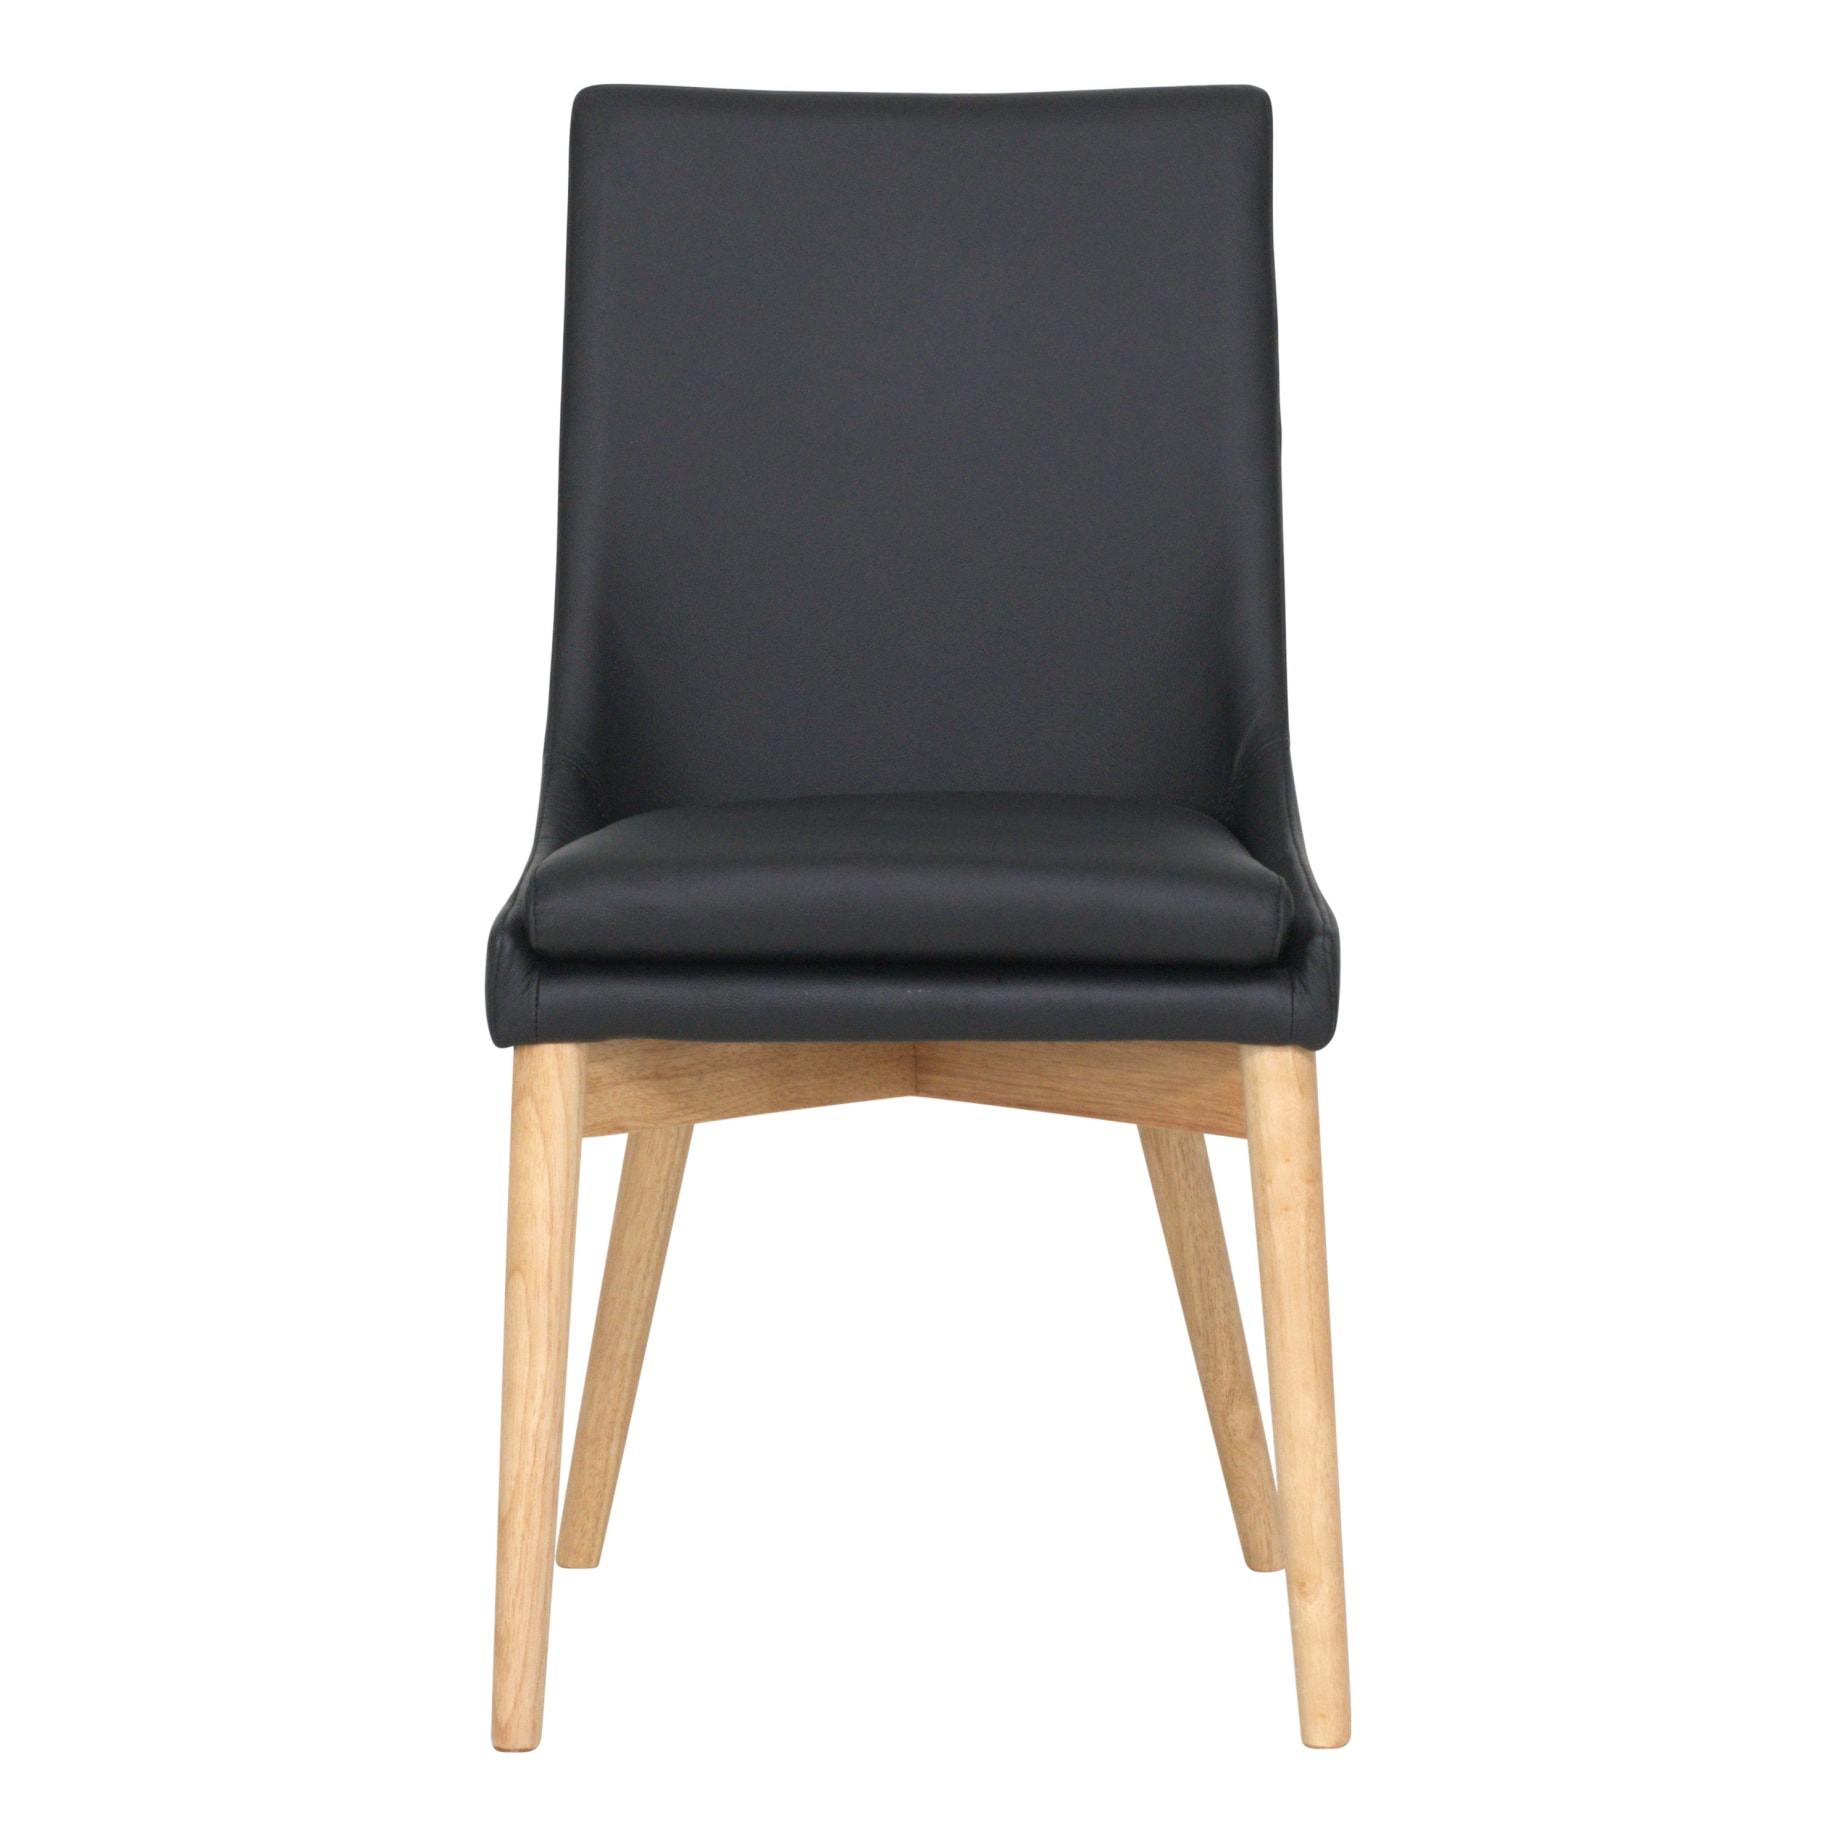 Highland Dining Chair in Leather Black / Clear Lacquer